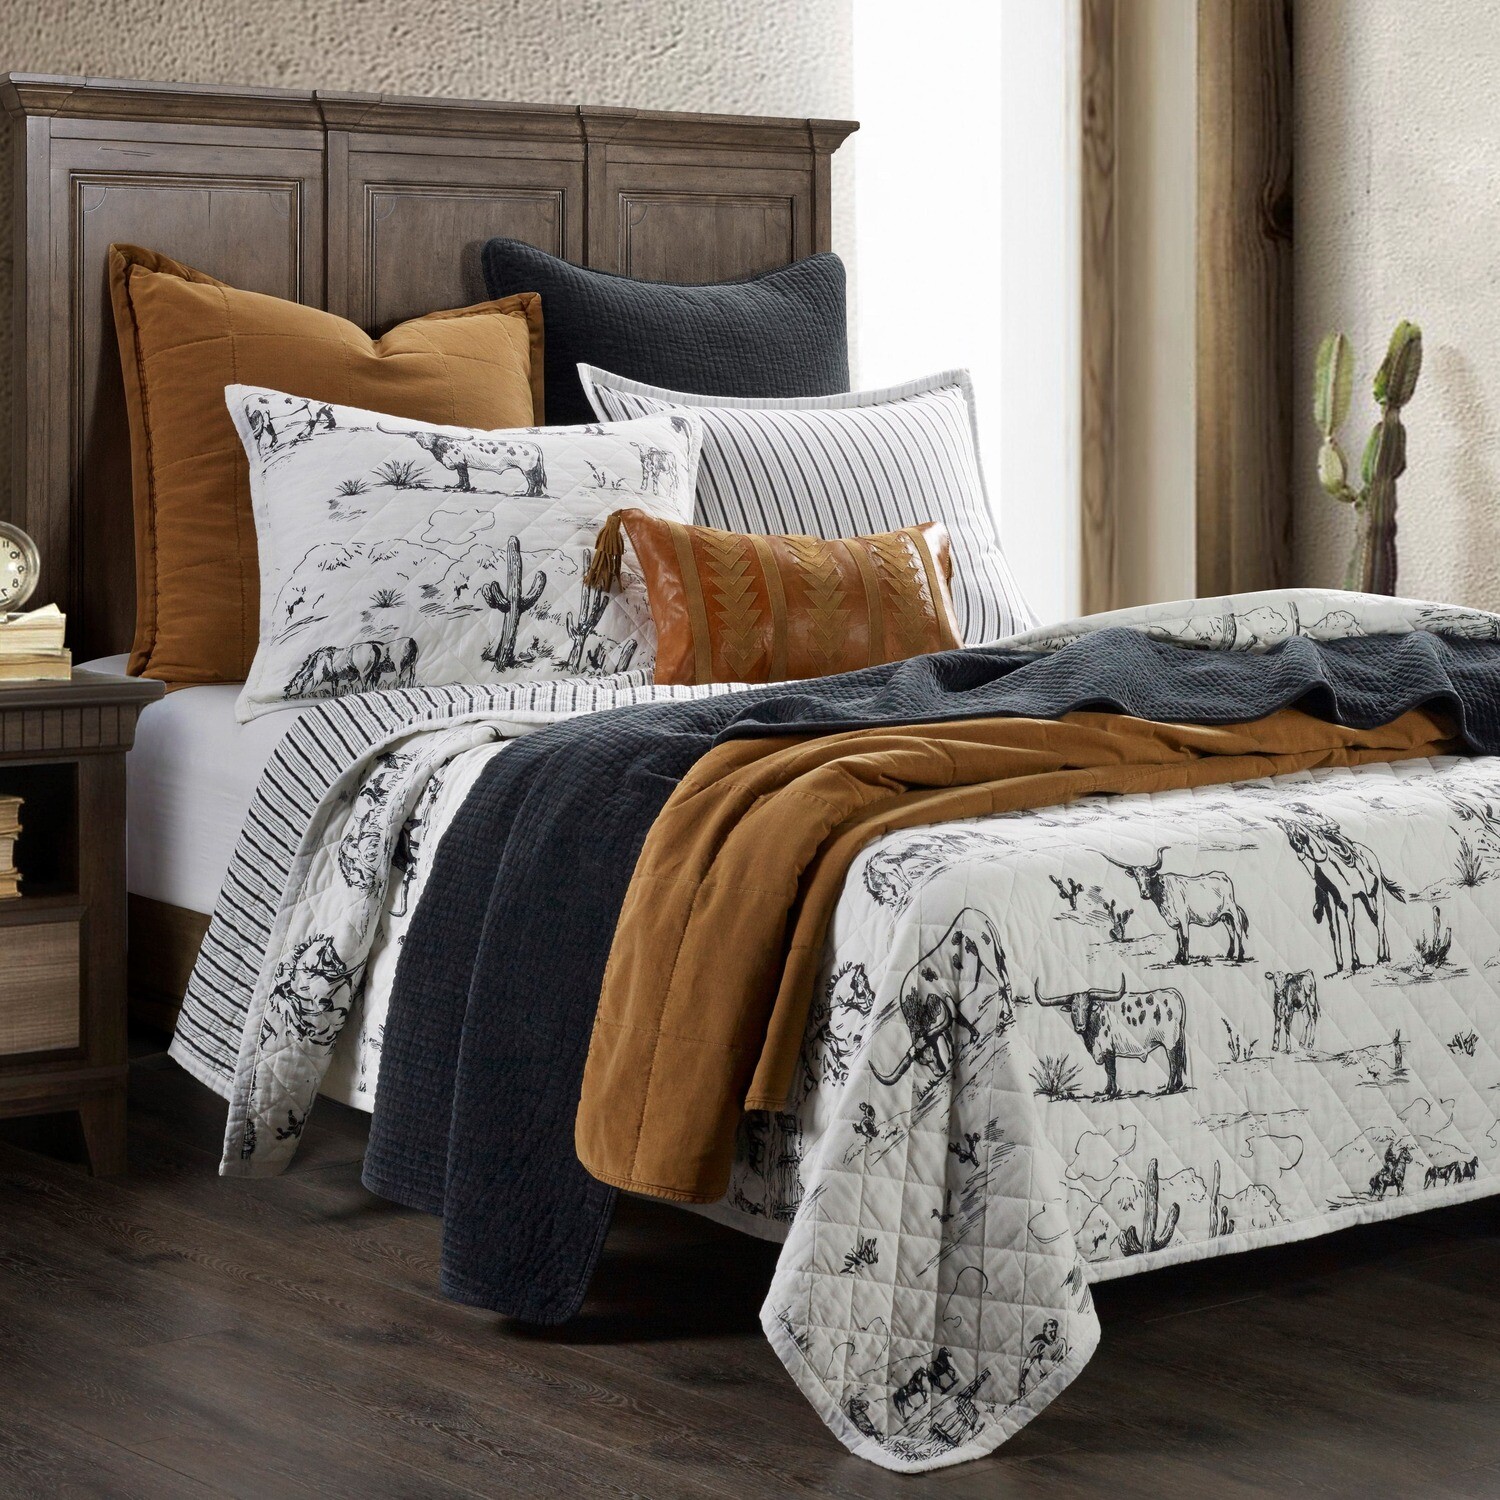 TWIN- Ranch Life Western Toile Reversible Quilt Set